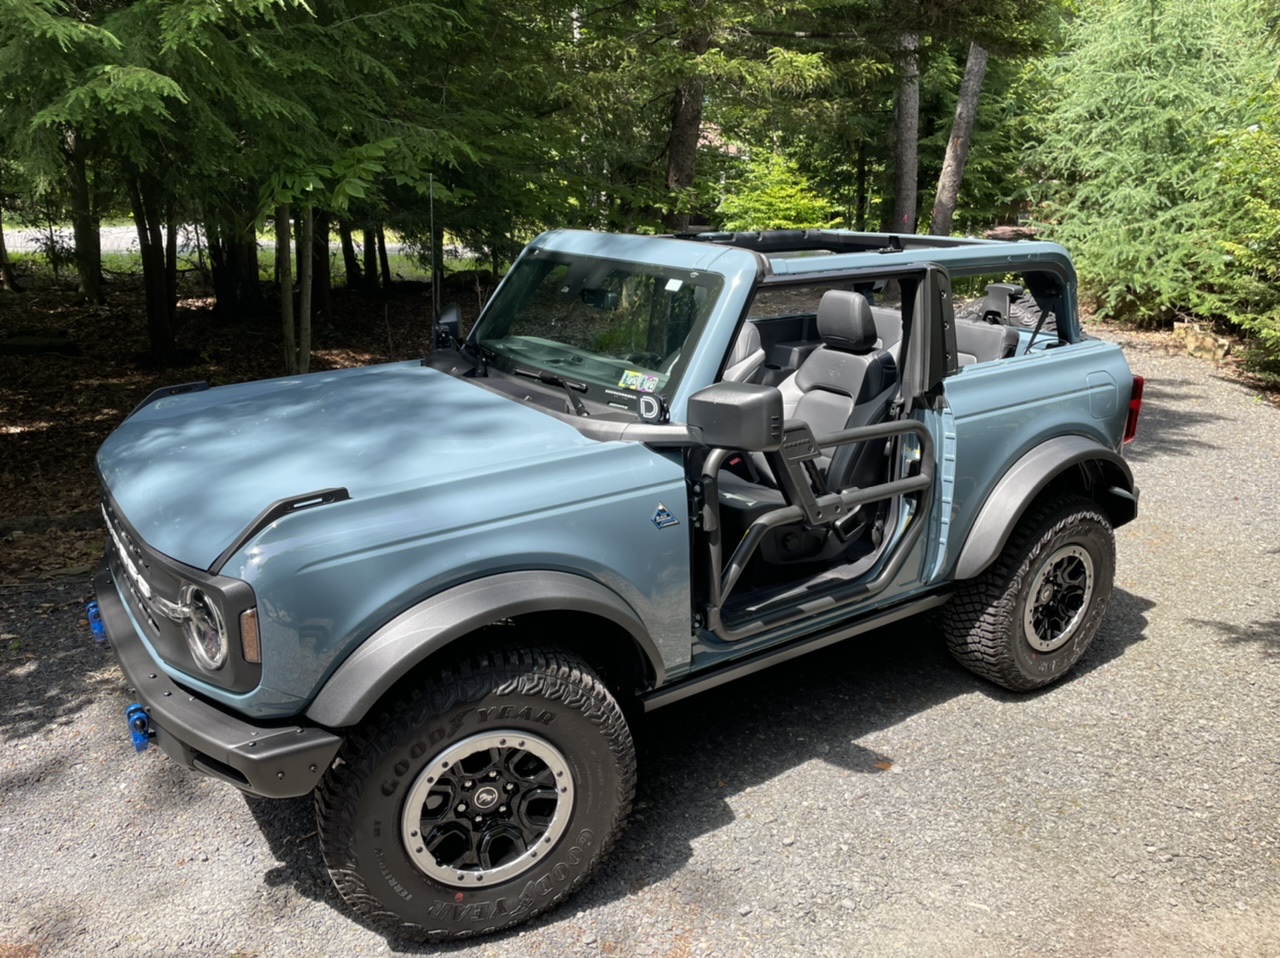 Ford Bronco Let’s see your doors off pics… F5F38527-8B36-428E-B30F-772B2277C35F